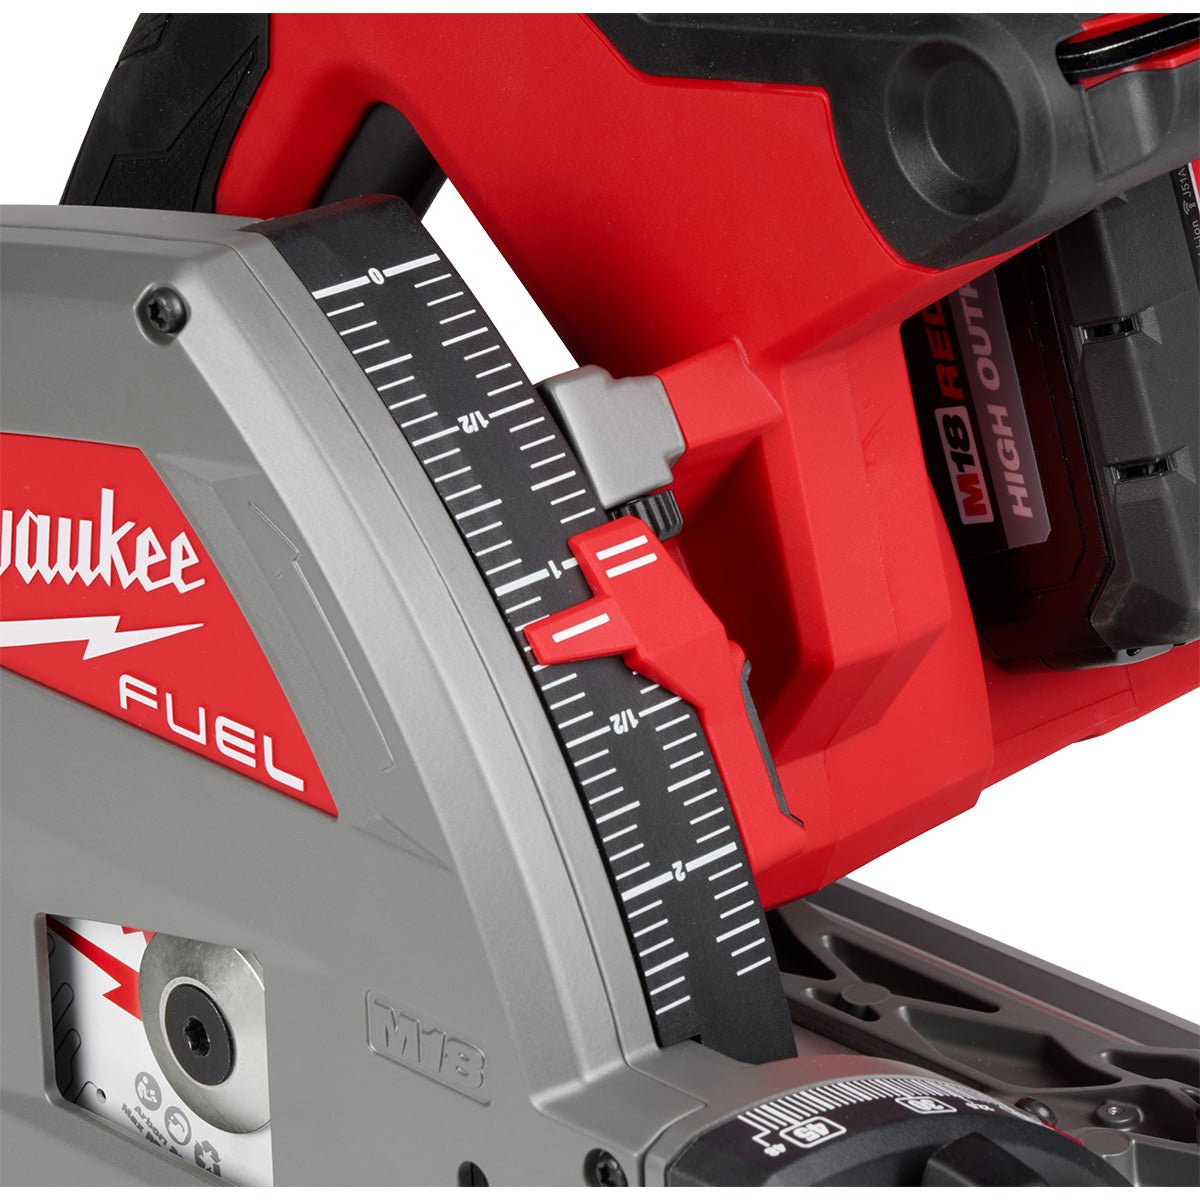 Milwaukee 2831-21 - M18 FUEL 18 Volt Lithium-Ion Brushless Cordless 6-1/2 in. Plunge Track Saw Kit